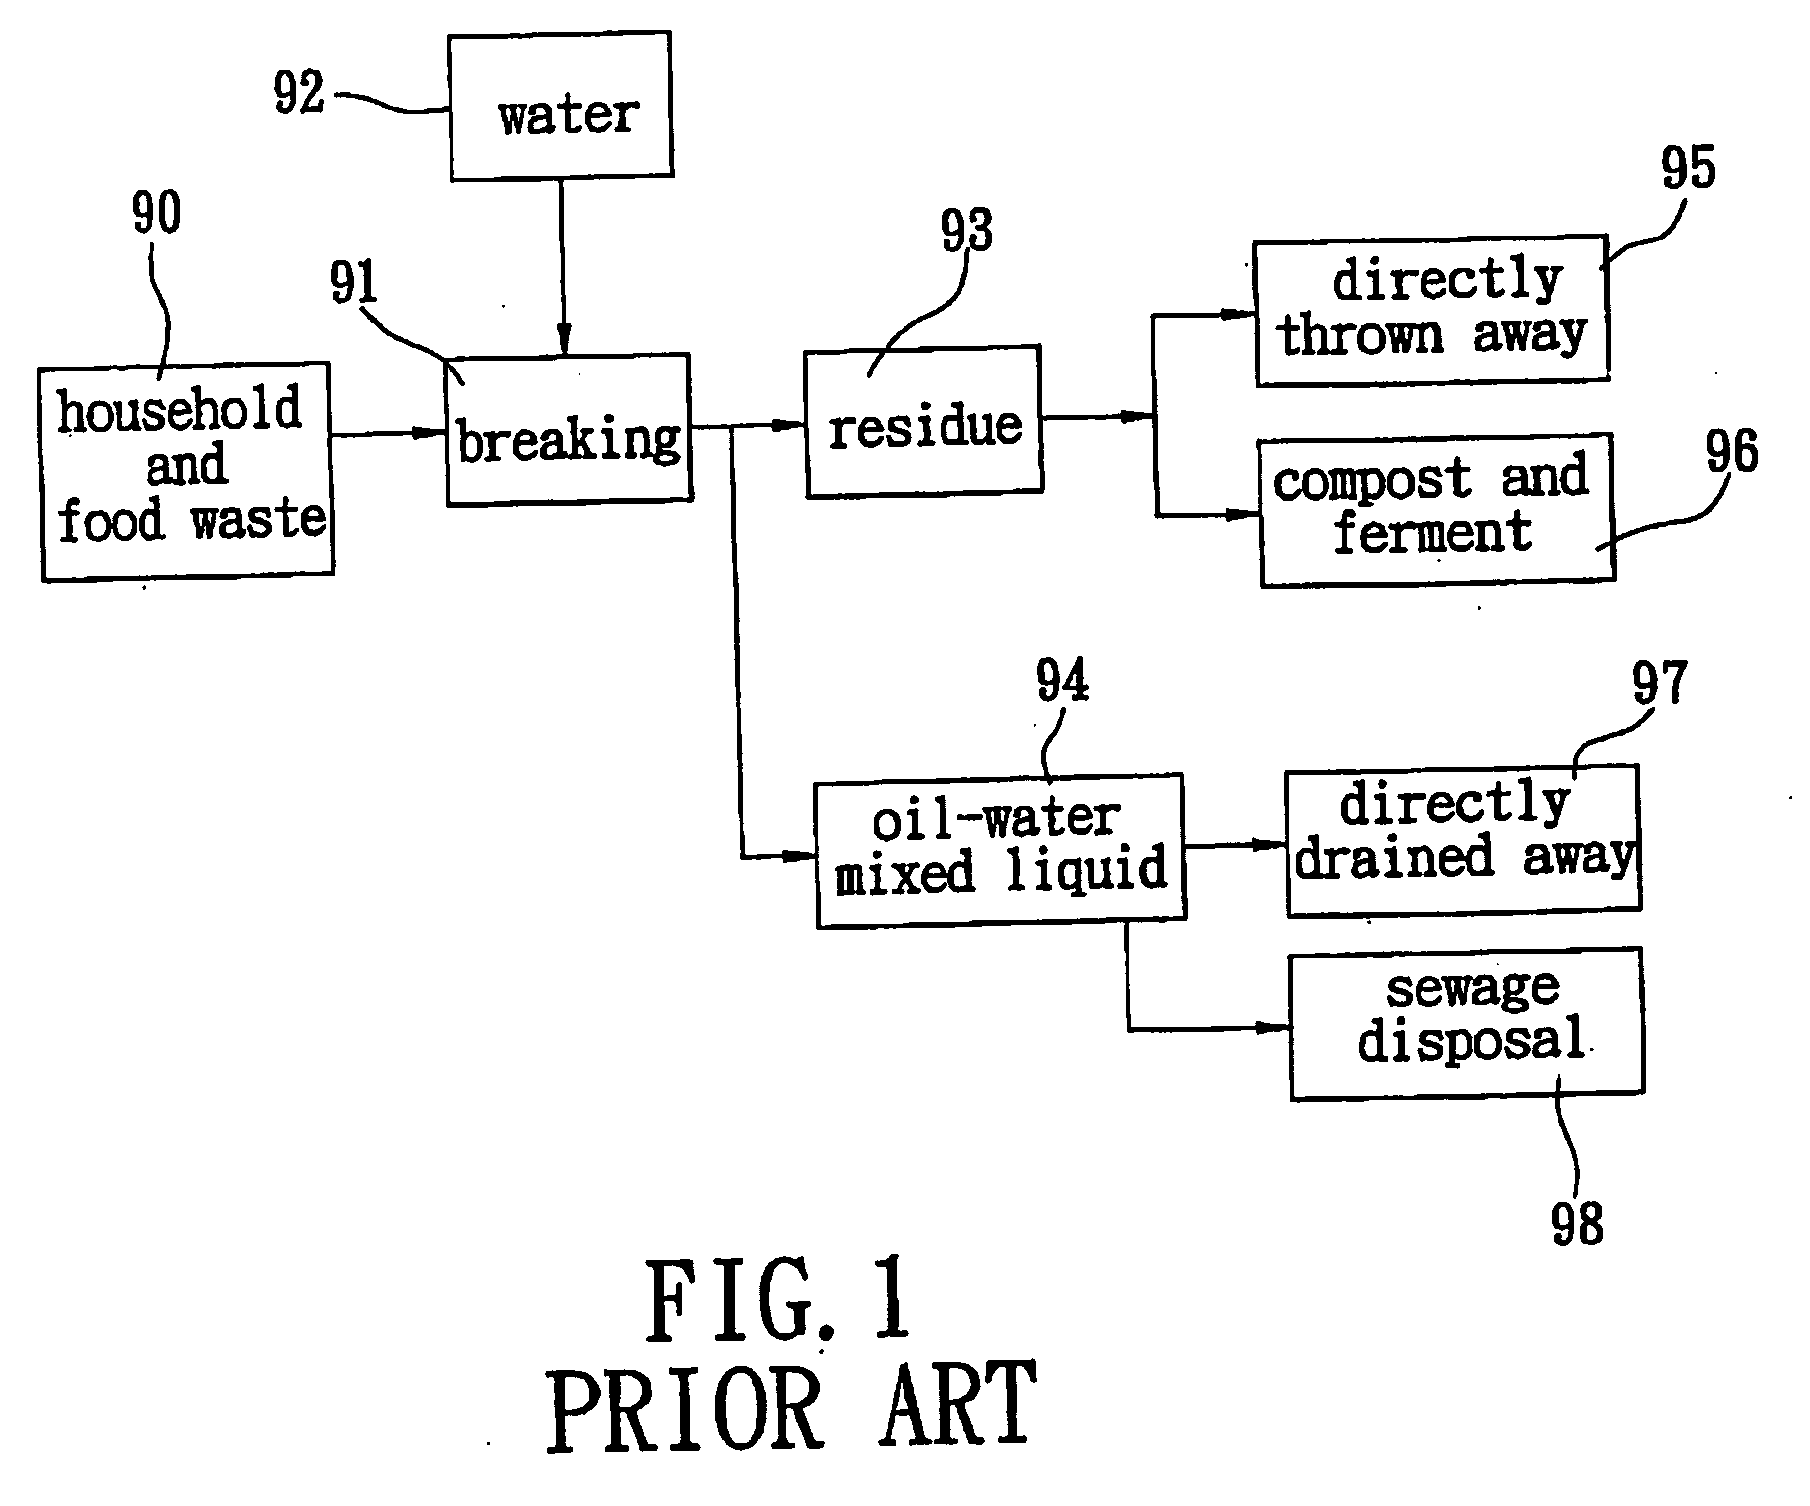 System and method for composting-free disposal of organic wastes